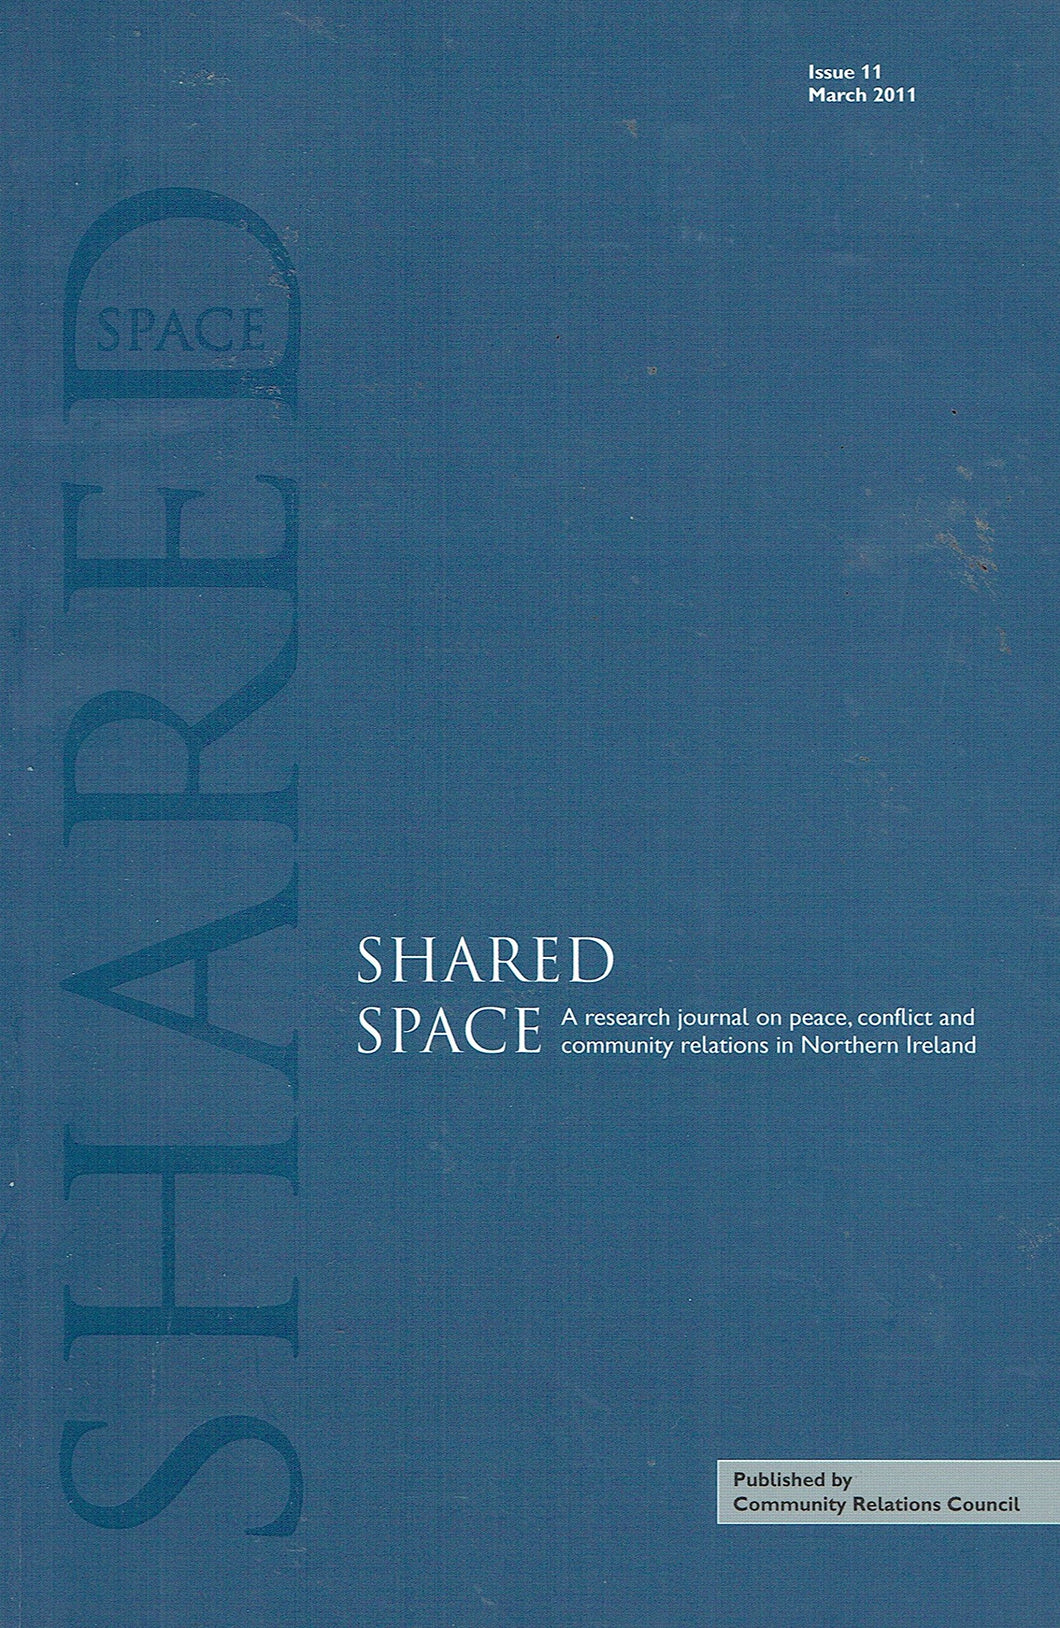 Shared Space, Issue 11 - March 2011: A Research Journal on Peace, Conflict and community Relations in Northern Ireland